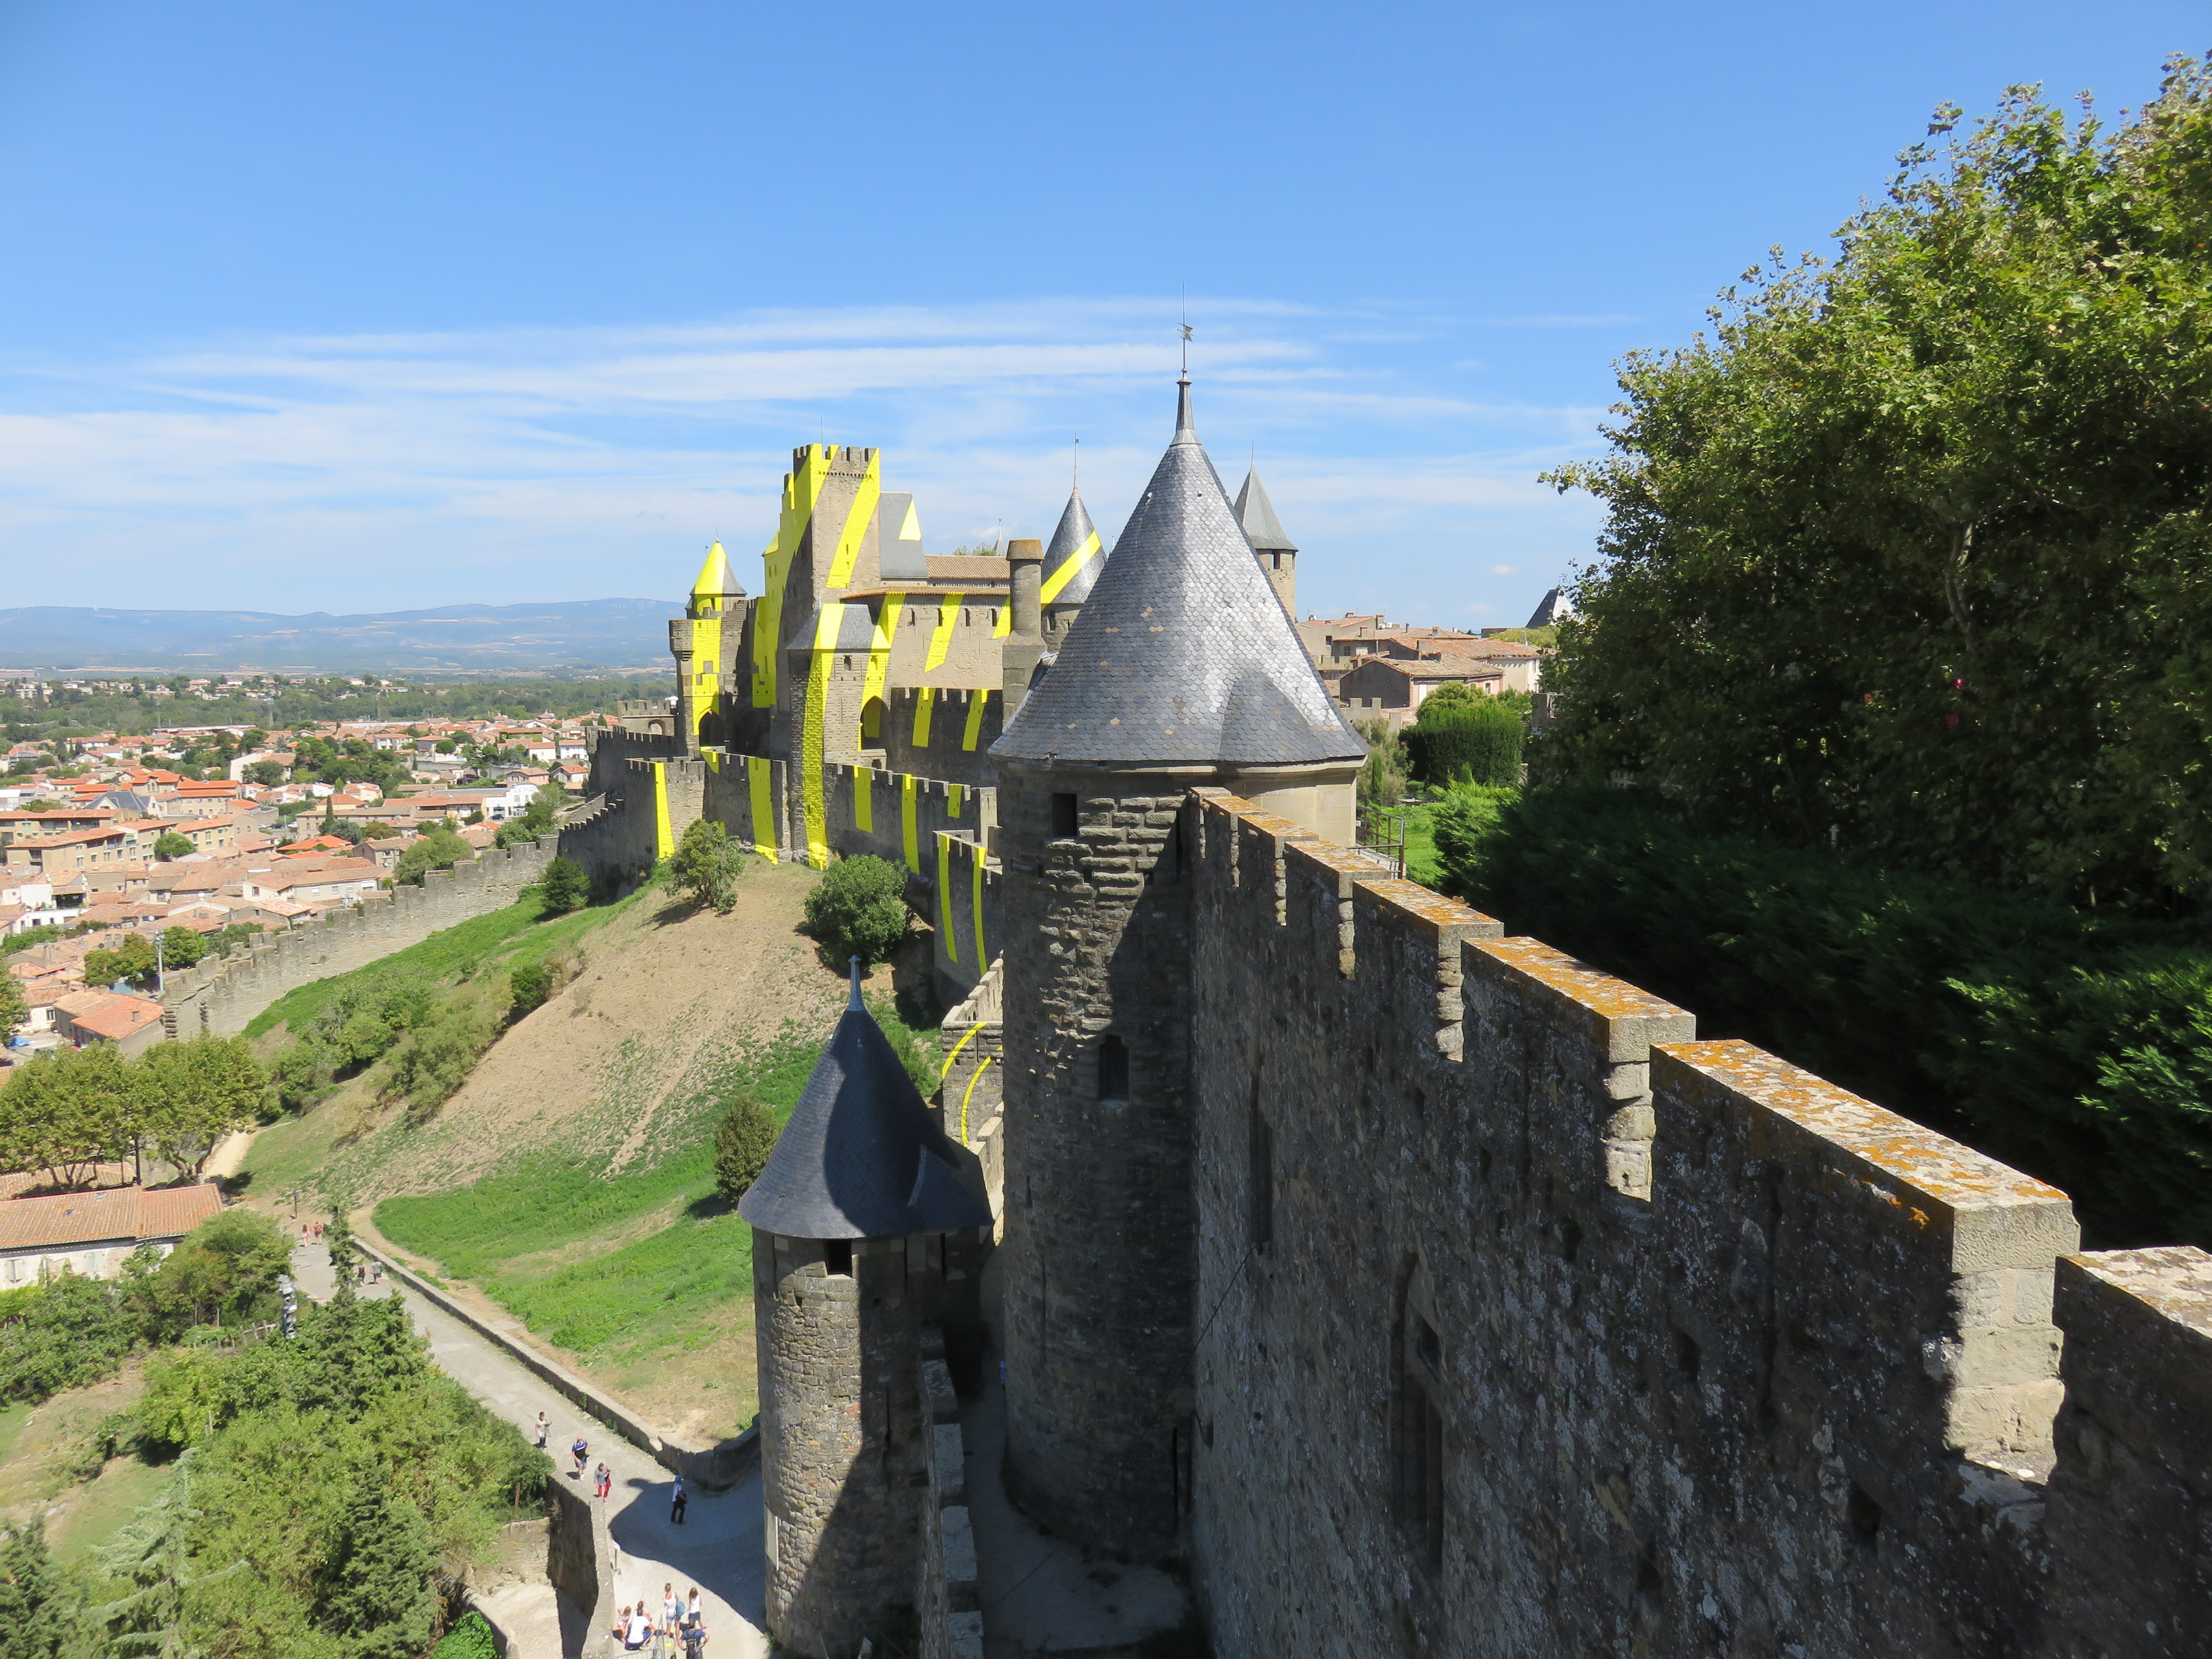 Medieval citadel Carcassonne | How Beautiful Life Is